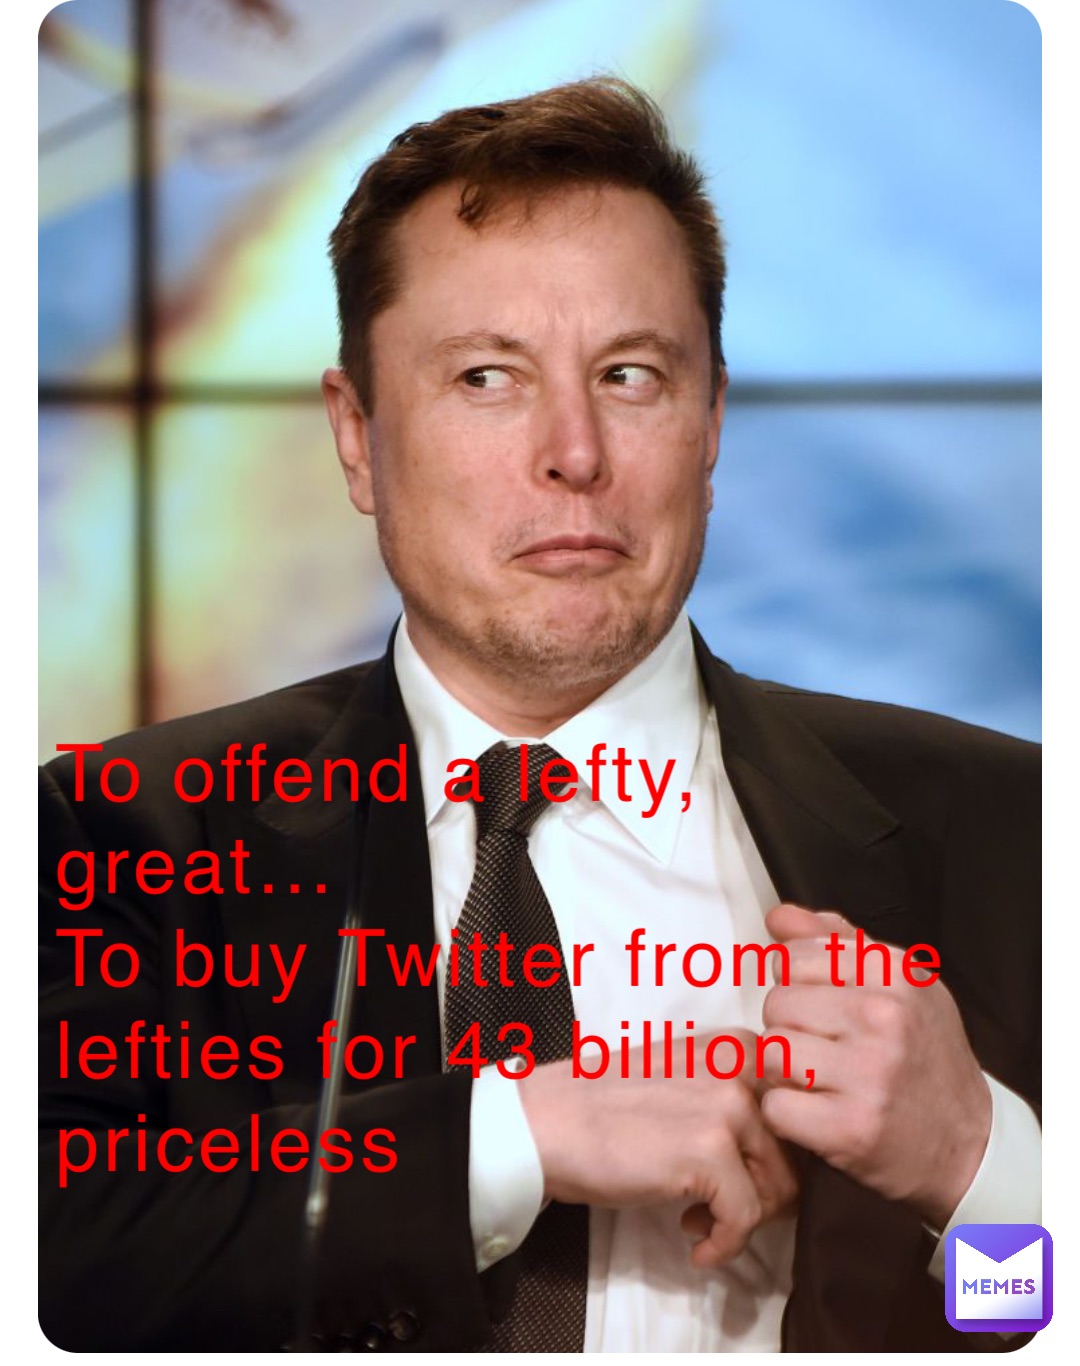 To offend a lefty, 
great…
To buy Twitter from the lefties for 43 billion, 
priceless